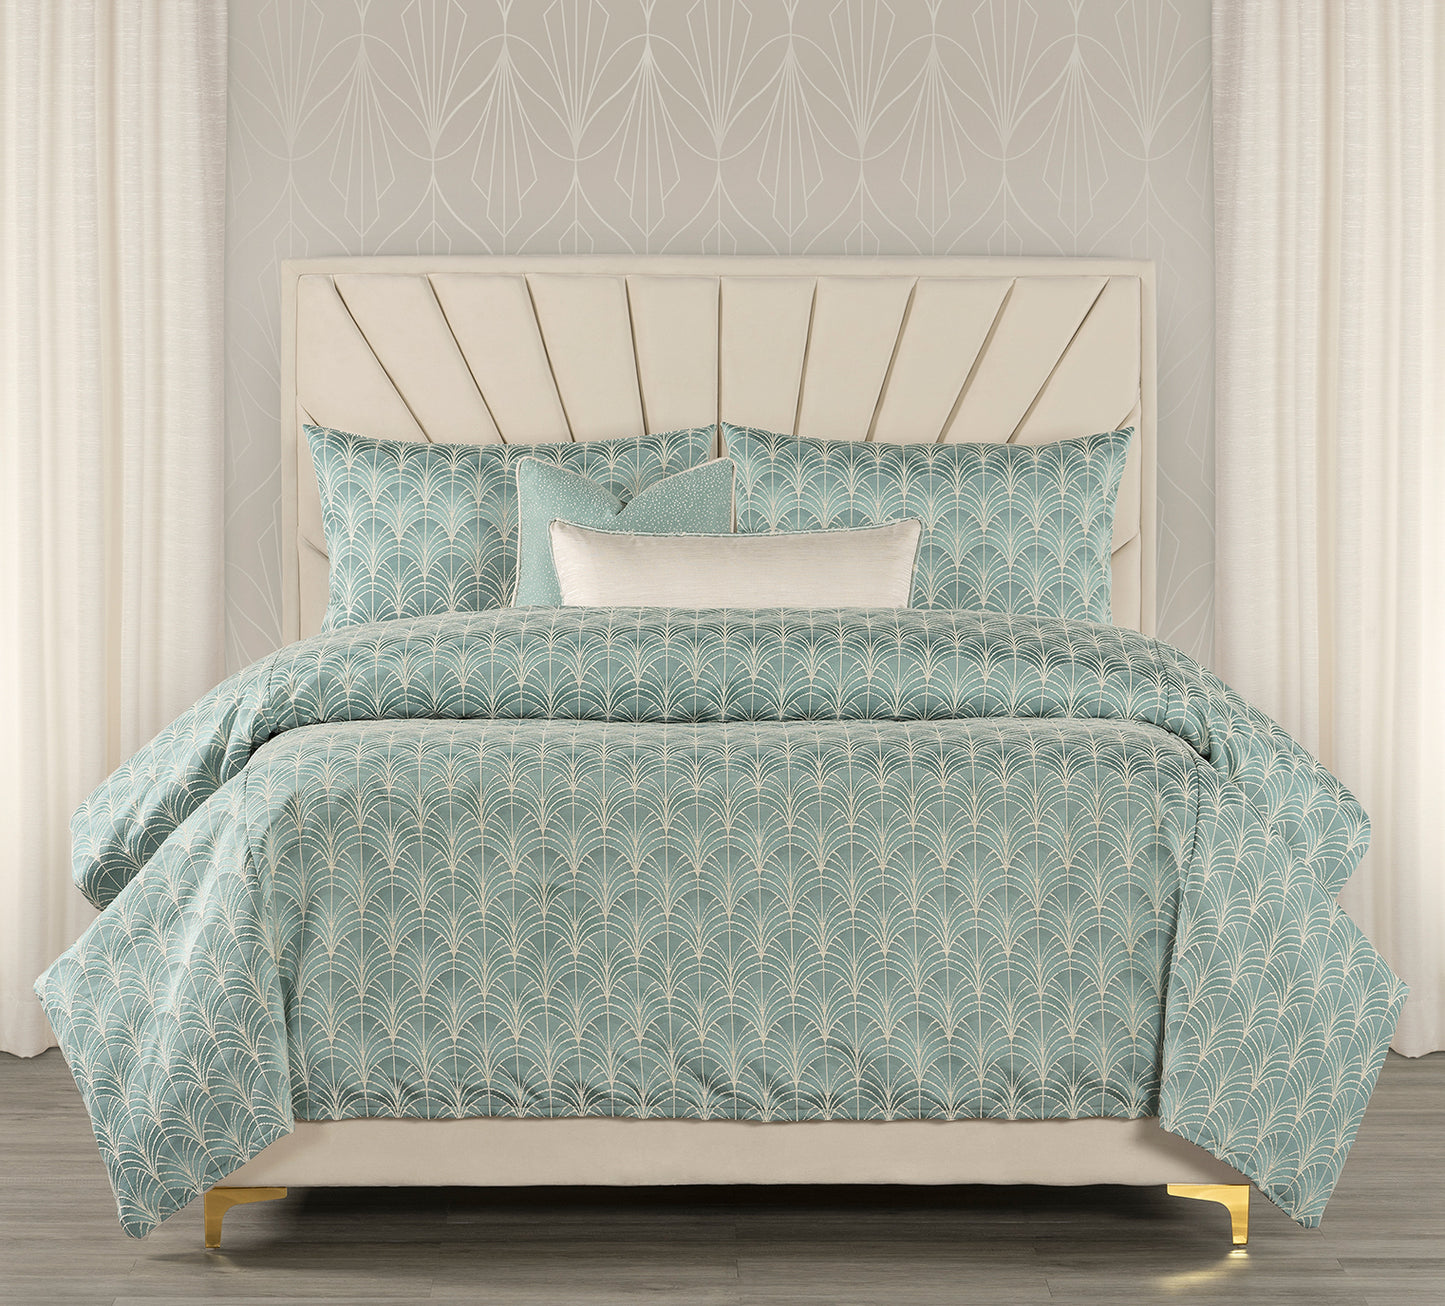 At The Gate Blue Queen Comforter Set